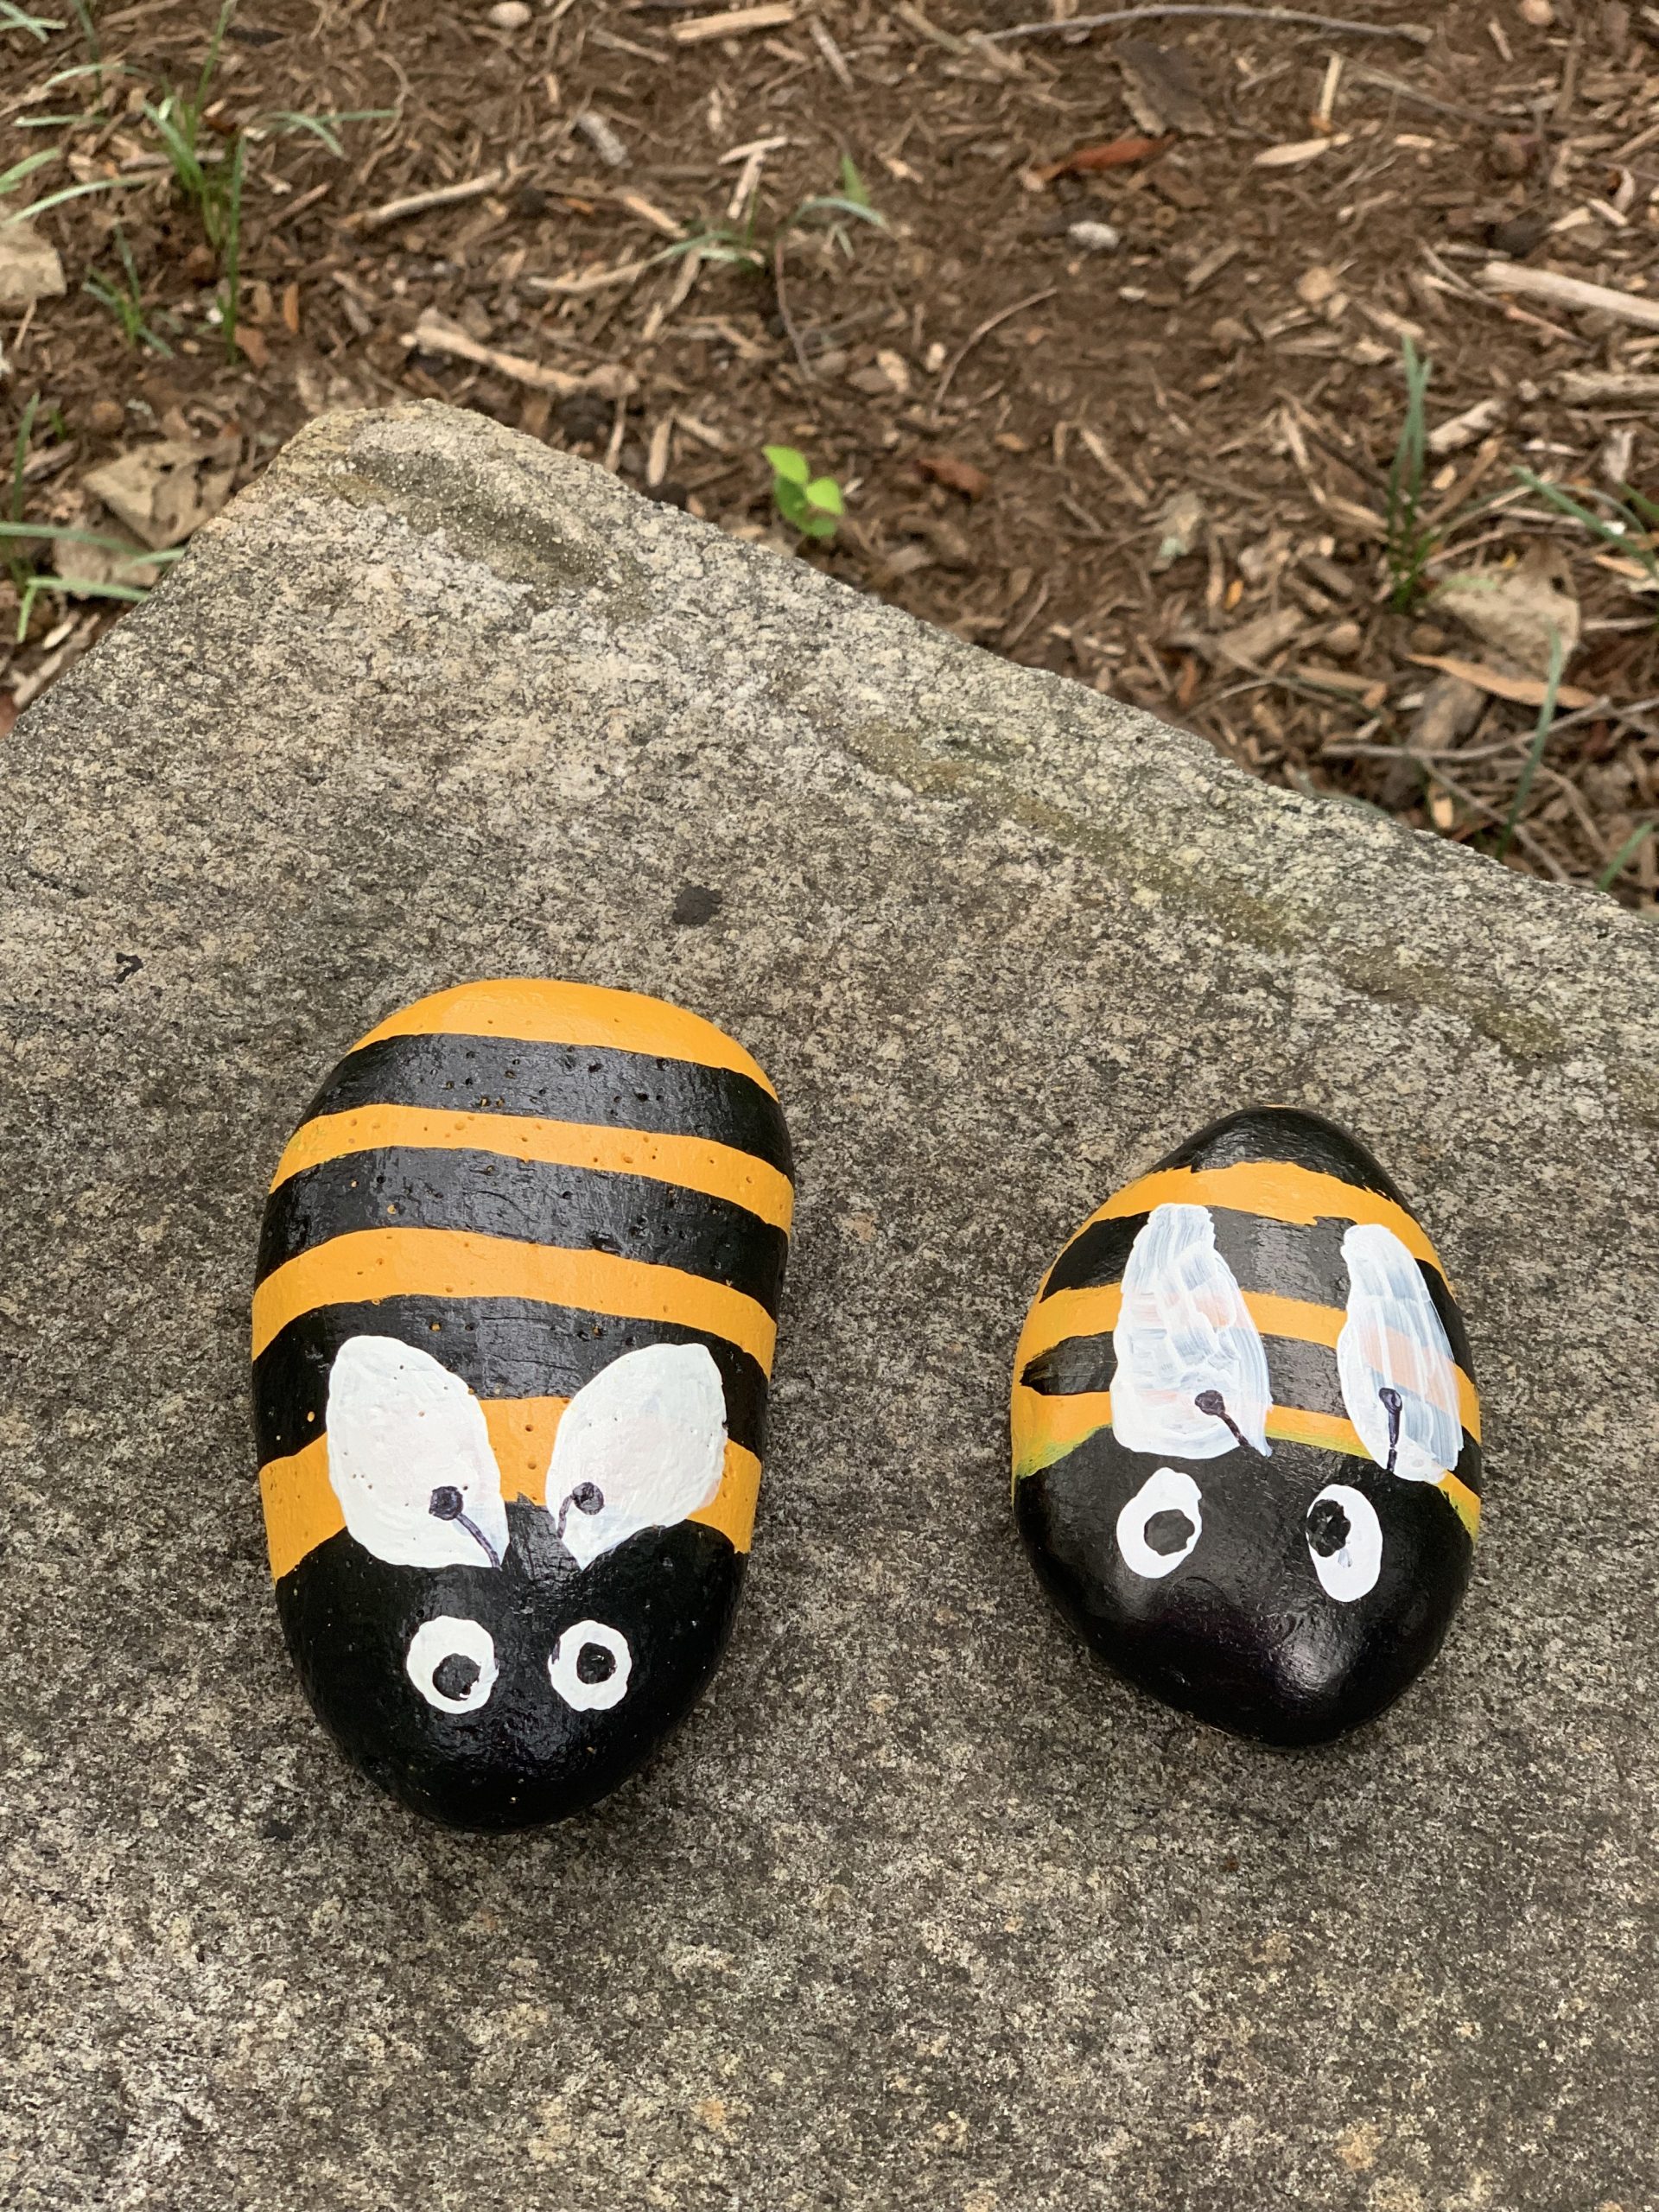 Two rocks painted like bees